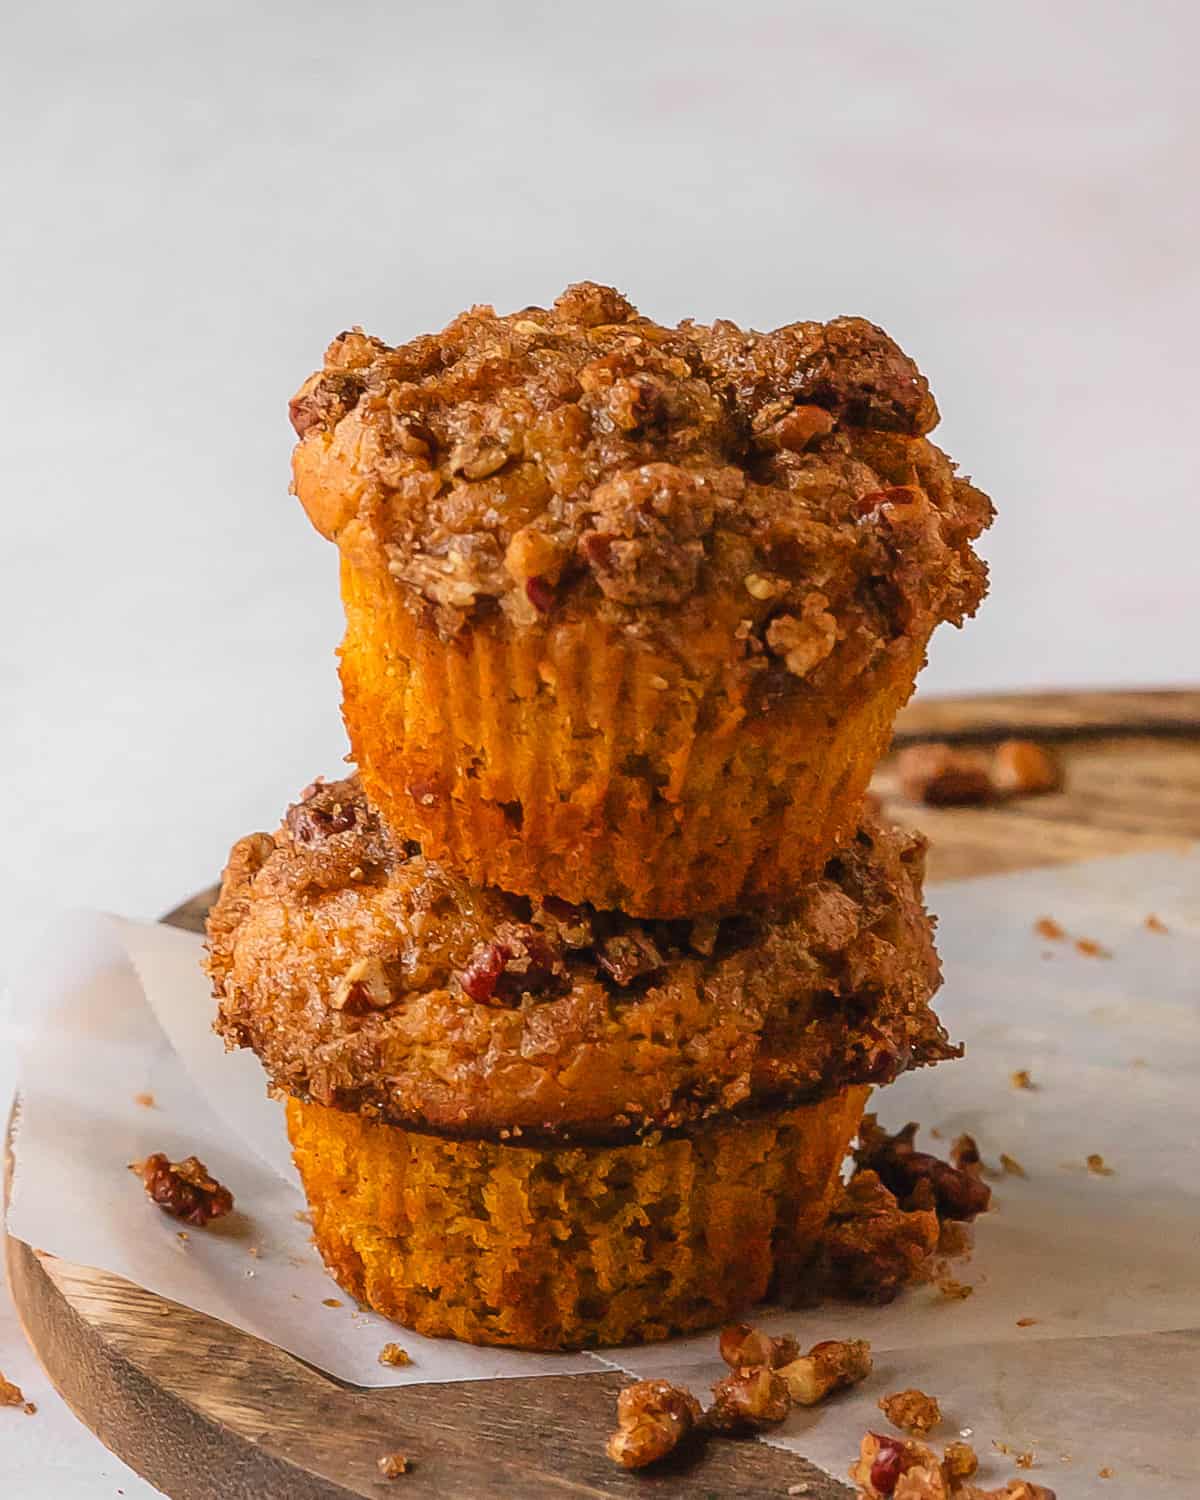 Sweet potato muffins are deliciously soft, moist and fluffy cinnamon spiced muffins with sweet potatoes.  They’re topped with a quick and easy brown sugar cinnamon streusel. Grab one or two for a wonderfully delicious breakfast, snack or dessert.